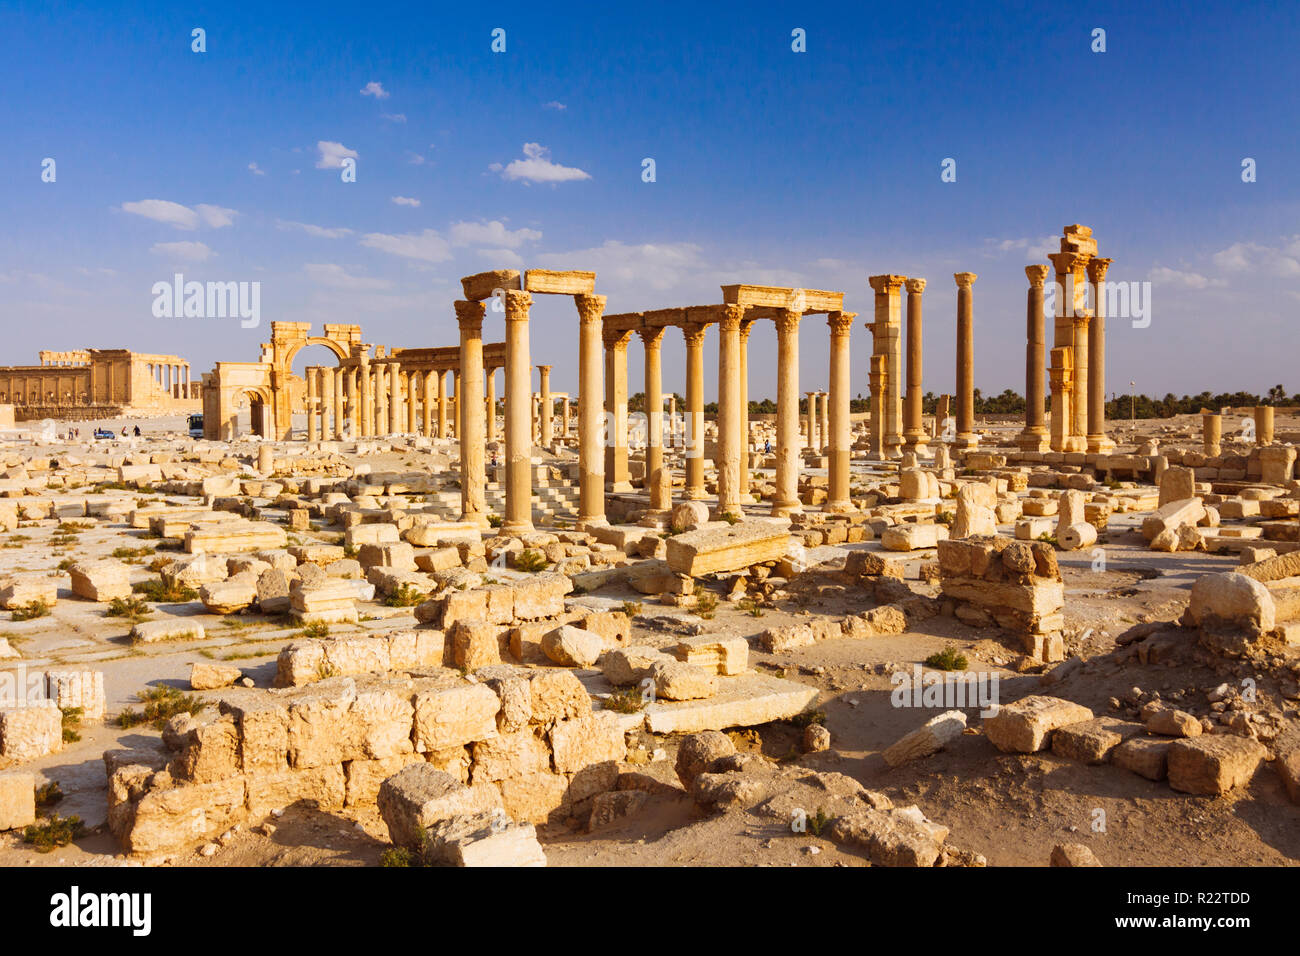 Palmyra, Homs Governorate, Syria - May 26th, 2009 : Great Colonnade of Palmyra at sunset. Built during the second and third century CE, it stretched f Stock Photo